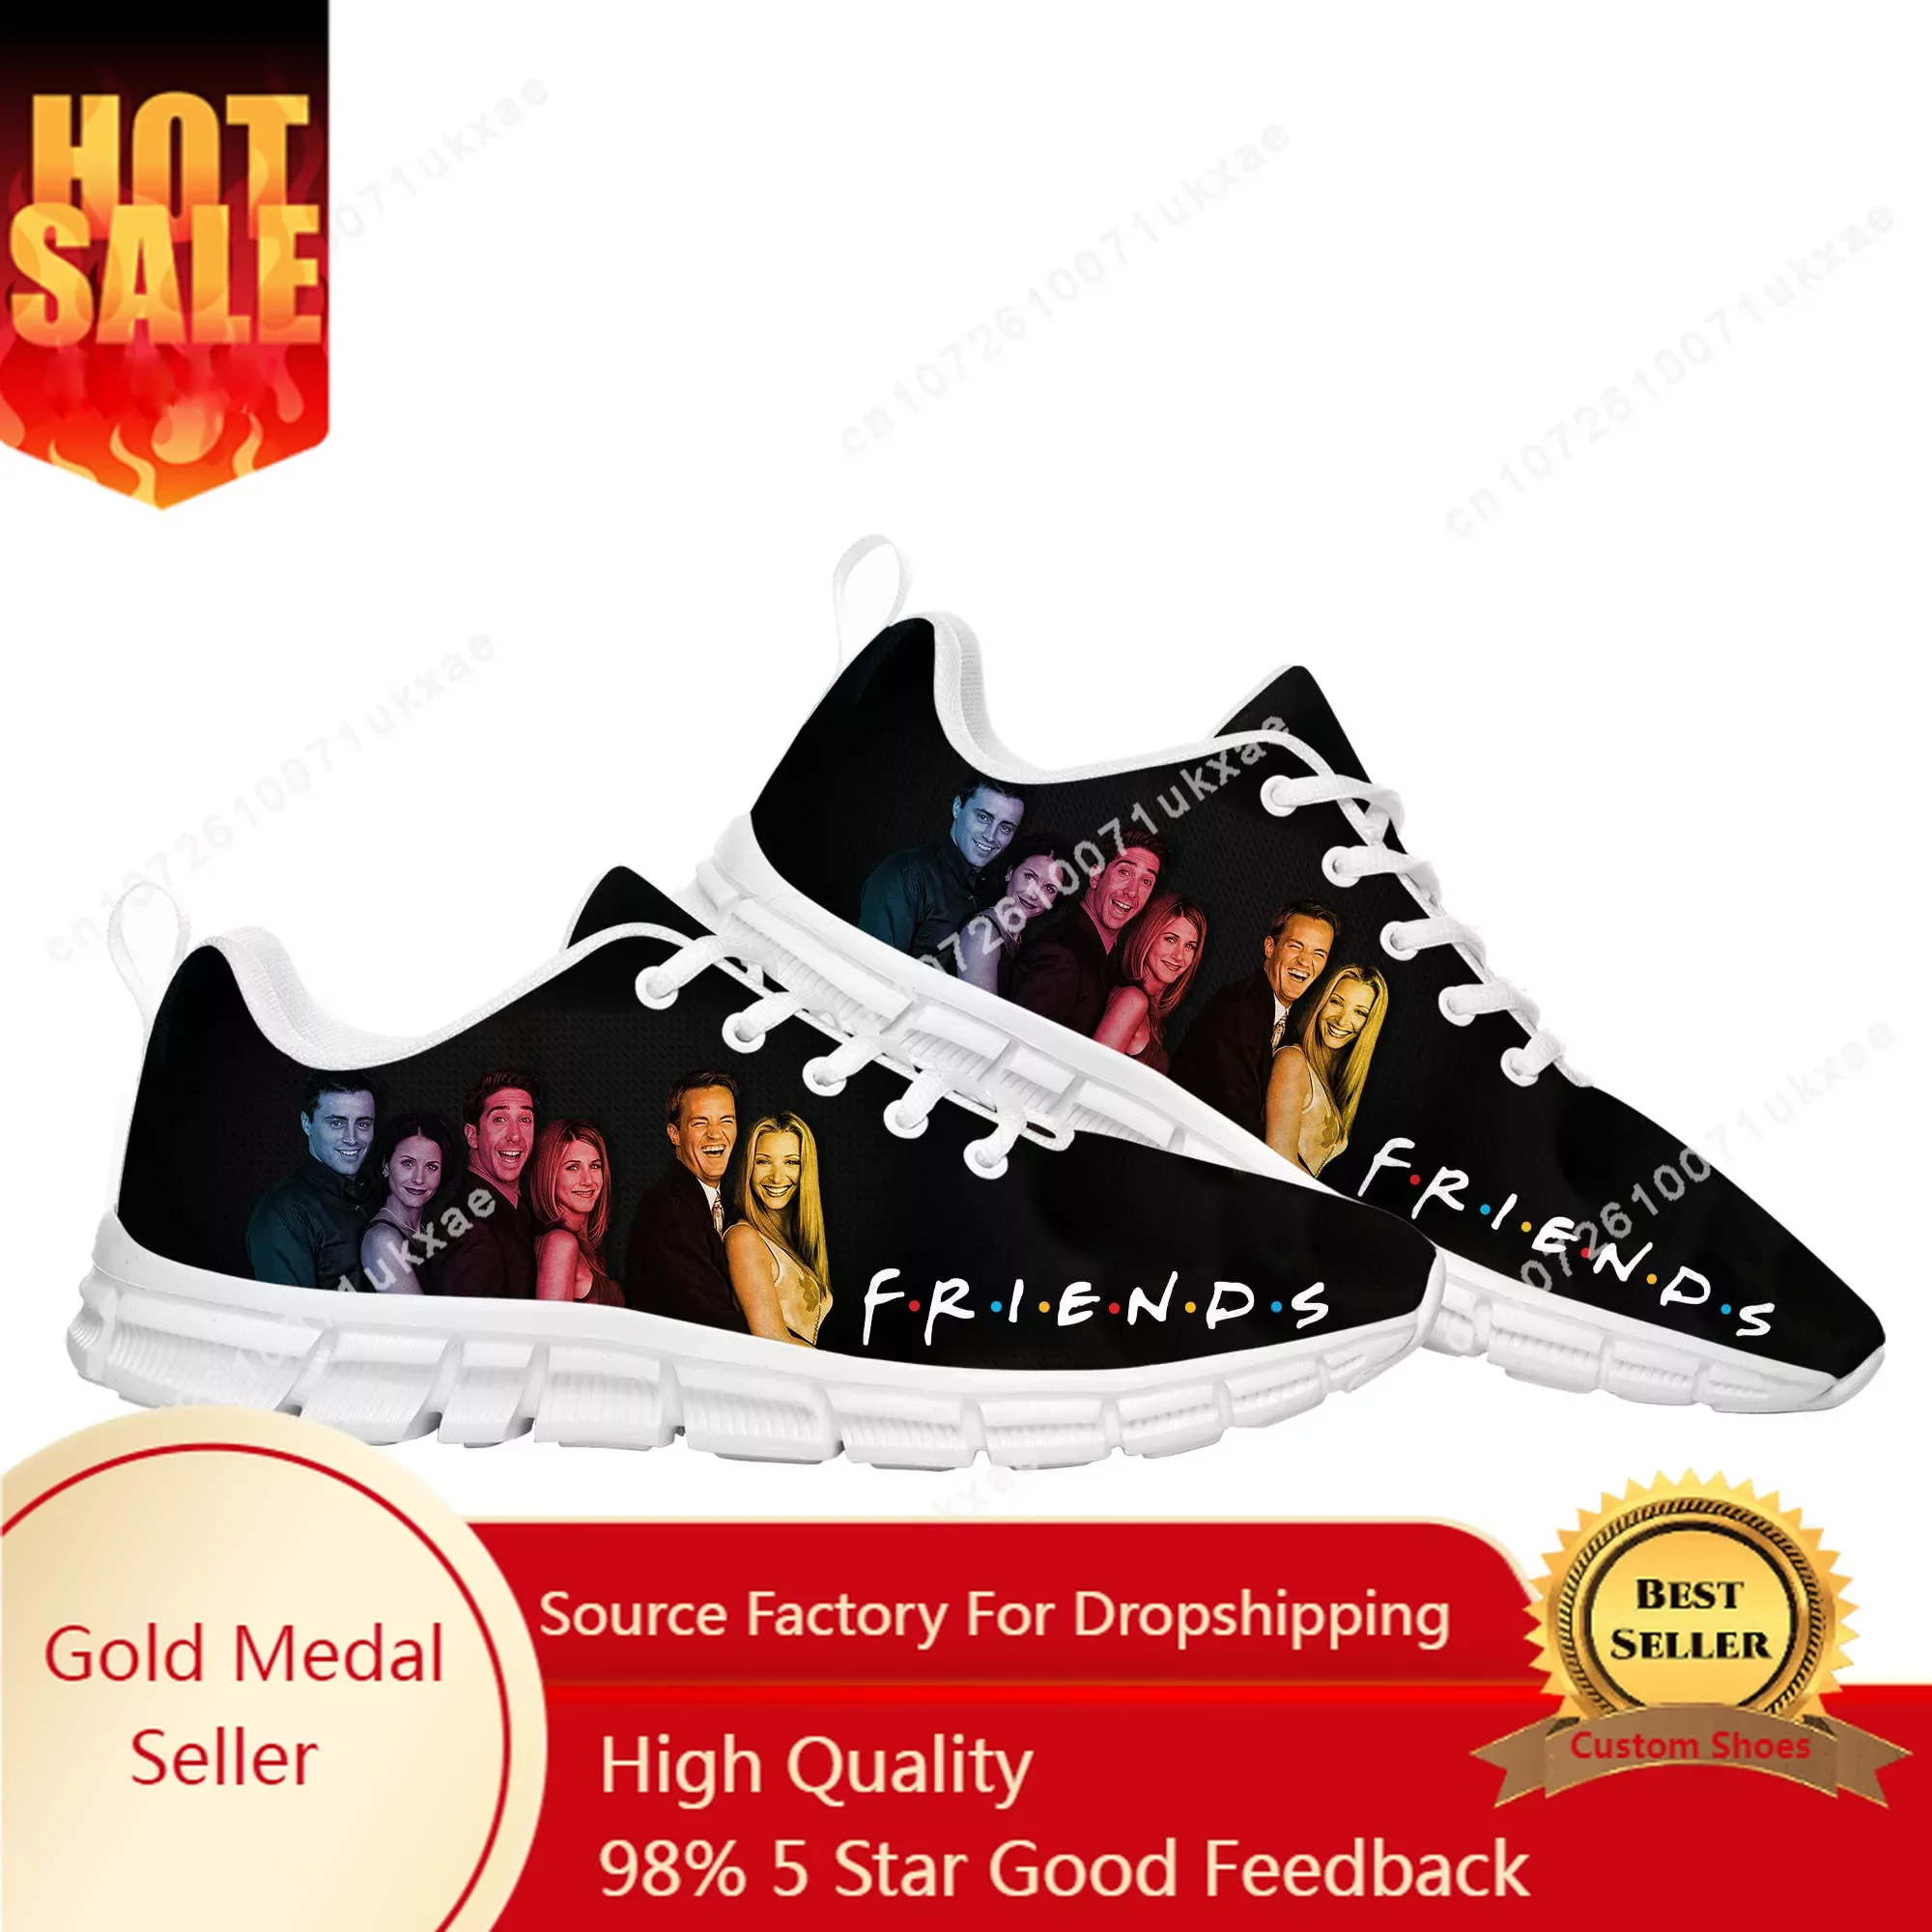 

Friends TV Show Central Perk Coffee Sports Shoes Mens Womens Teenager Kids Children Sneakers Parent Child Sneaker Customize Shoe